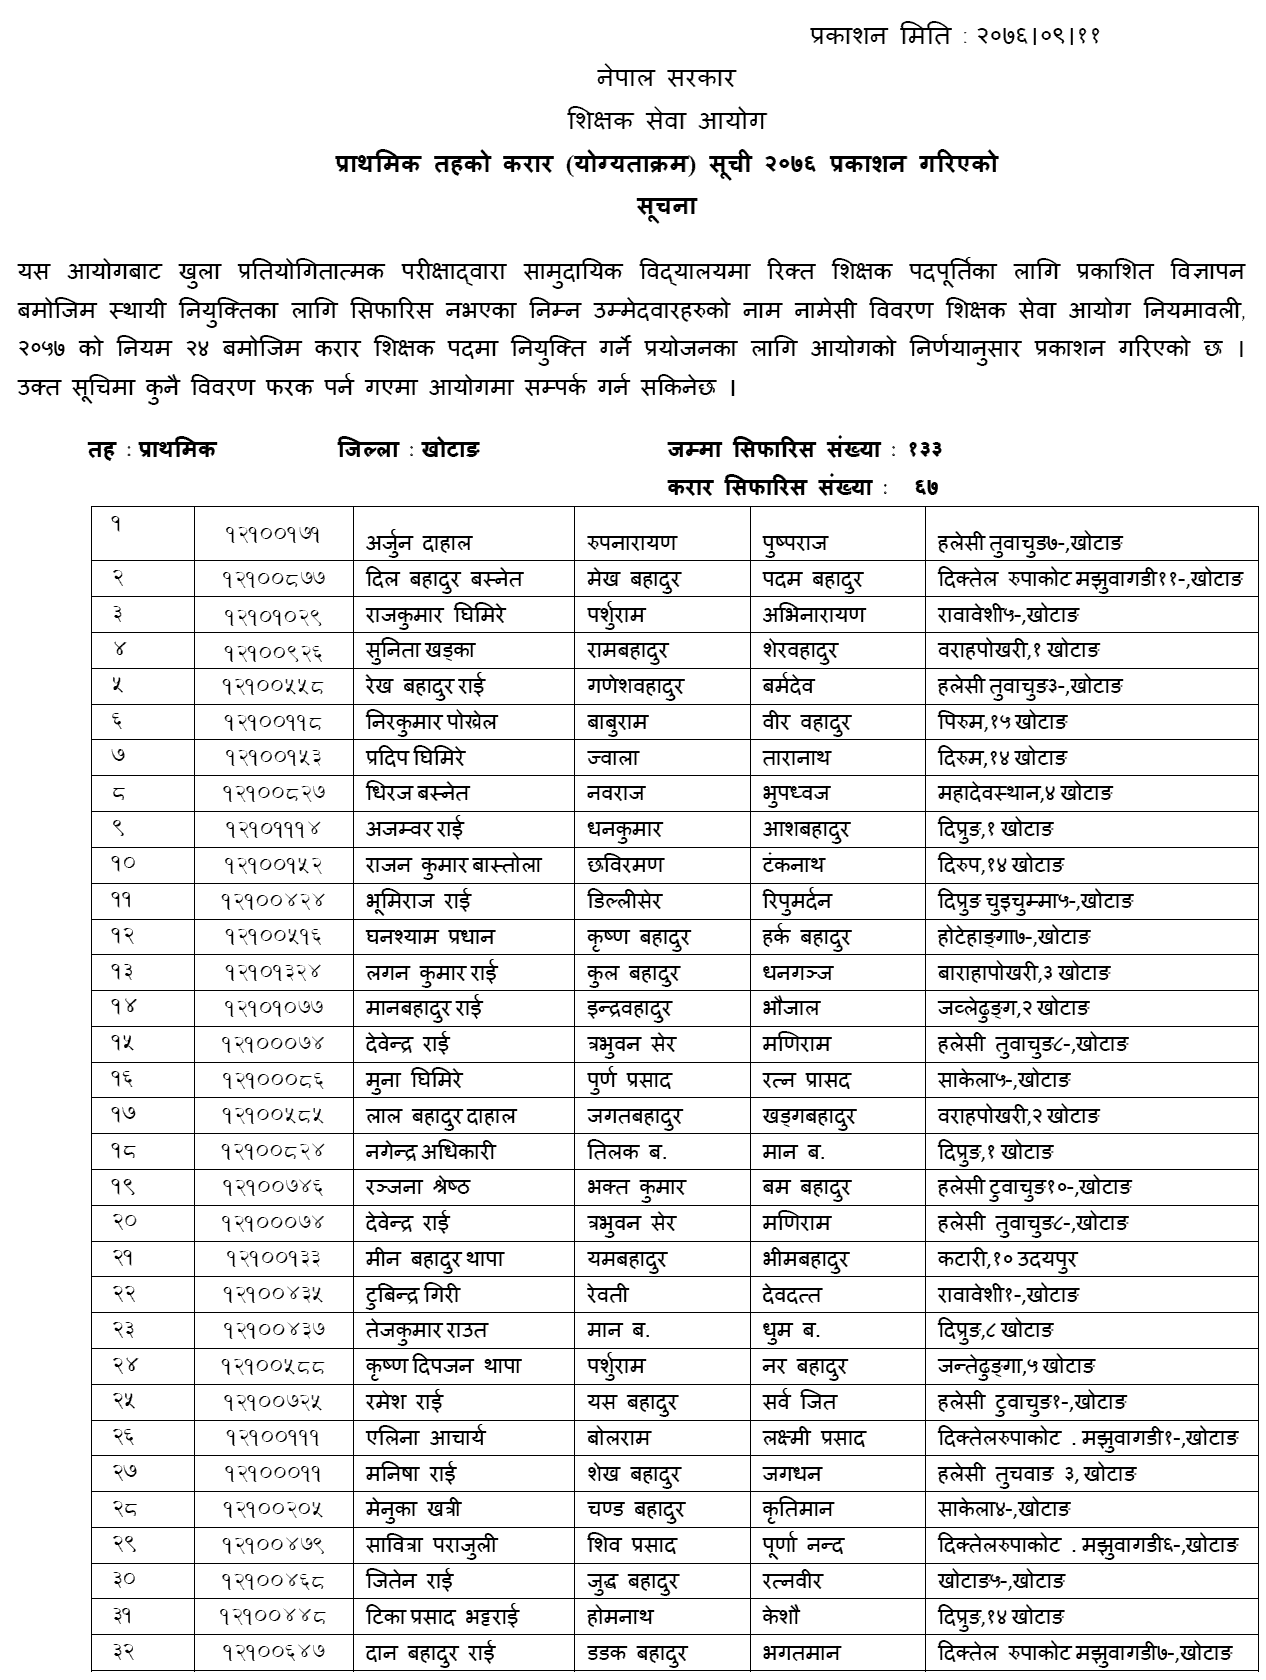 TSC Published Primary Level Contract List of Khotang